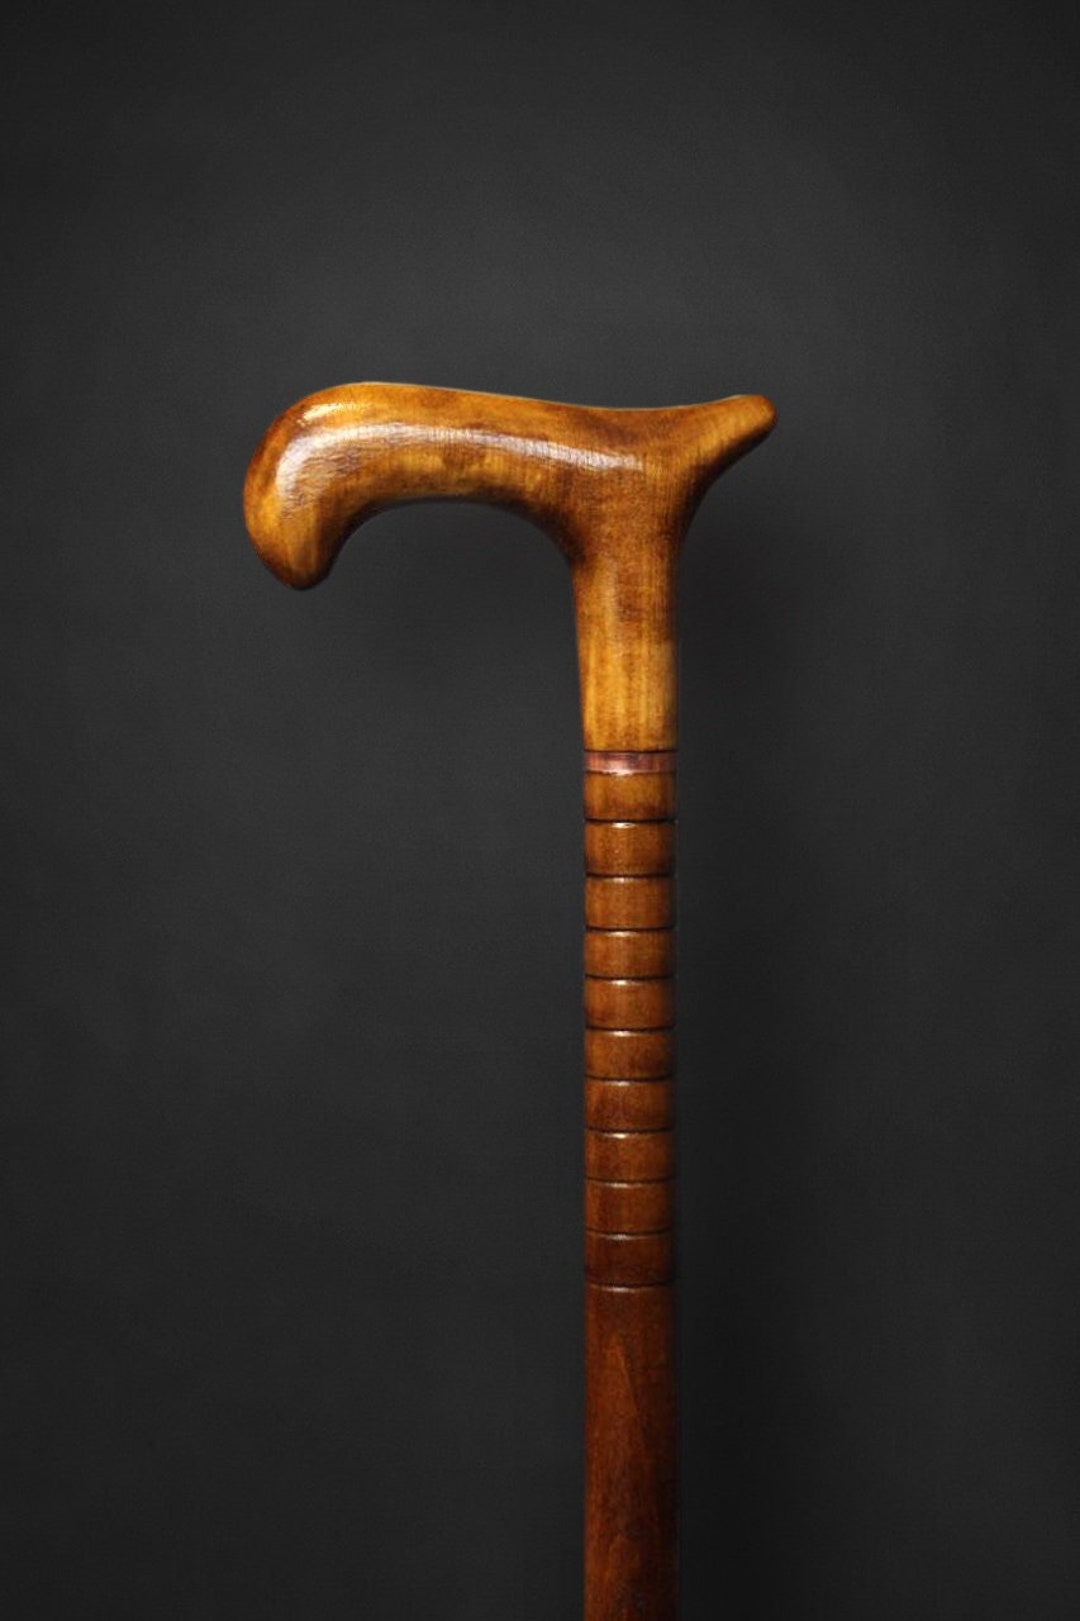 Cane Topper Woodcarving: Projects, Patterns, and Essential Techniques for Custom Canes and Walking Sticks [Book]